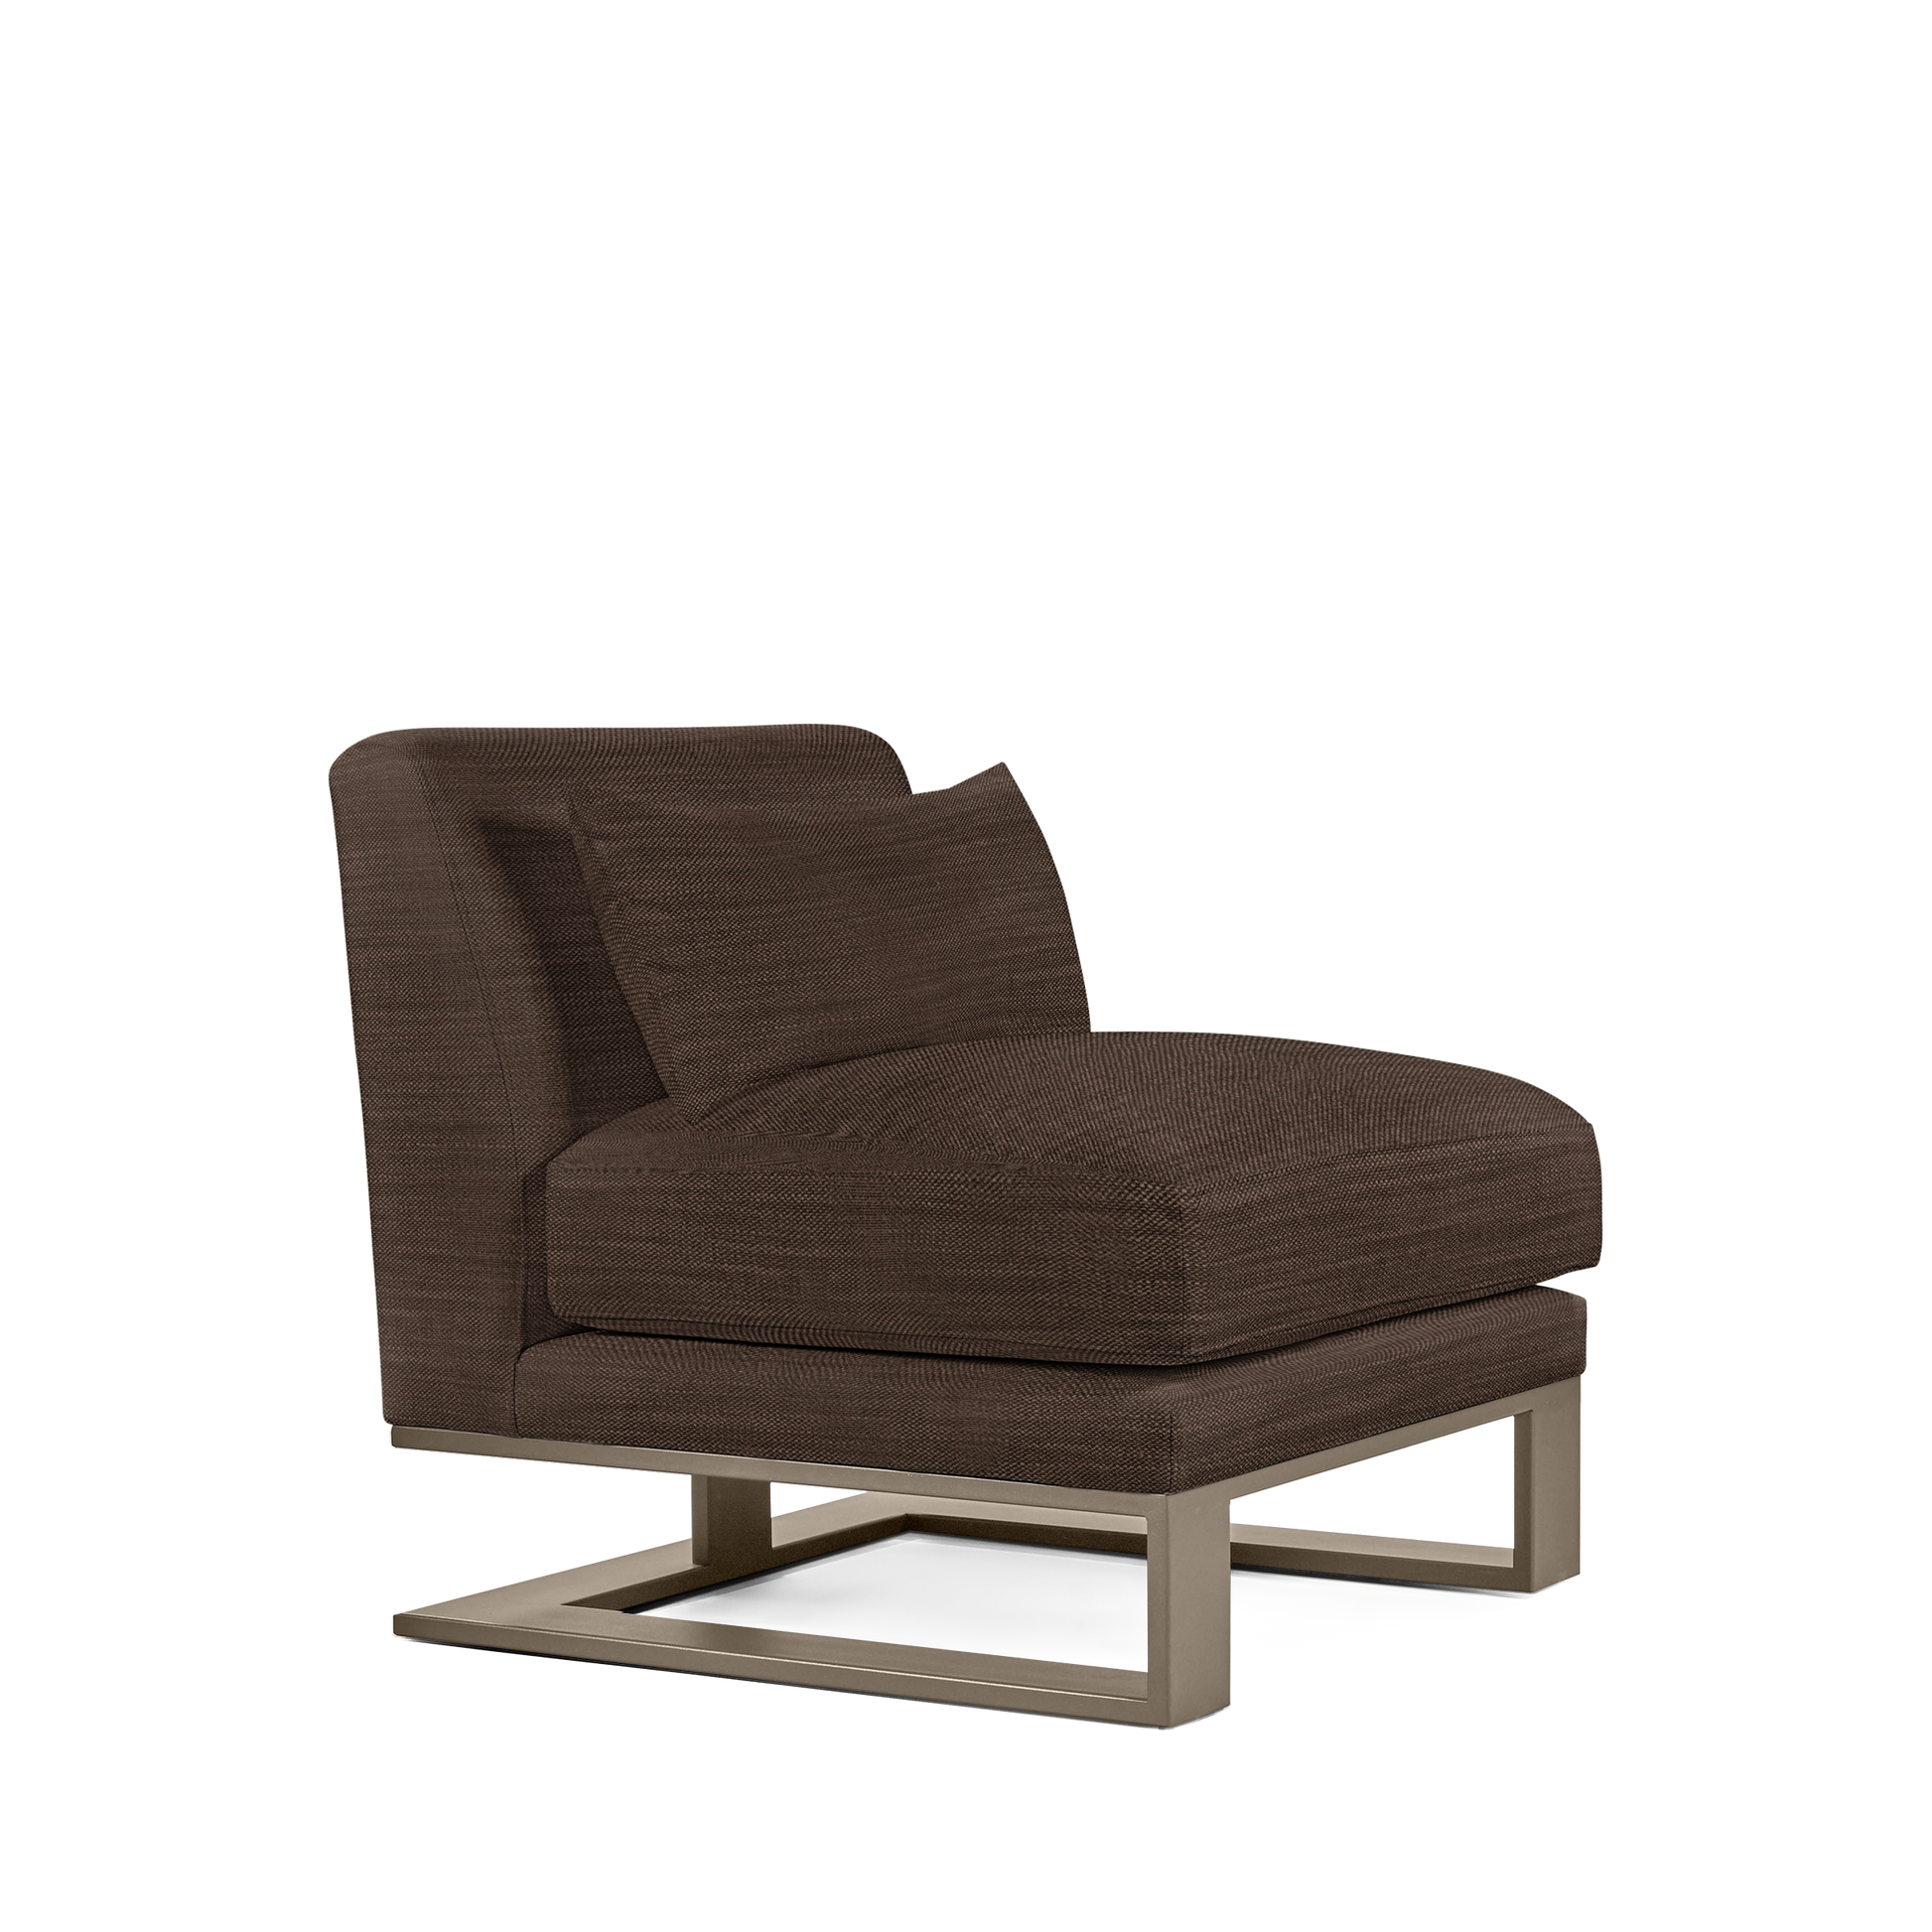 Alpes armchair with brown textile and champagne colored wood legs 